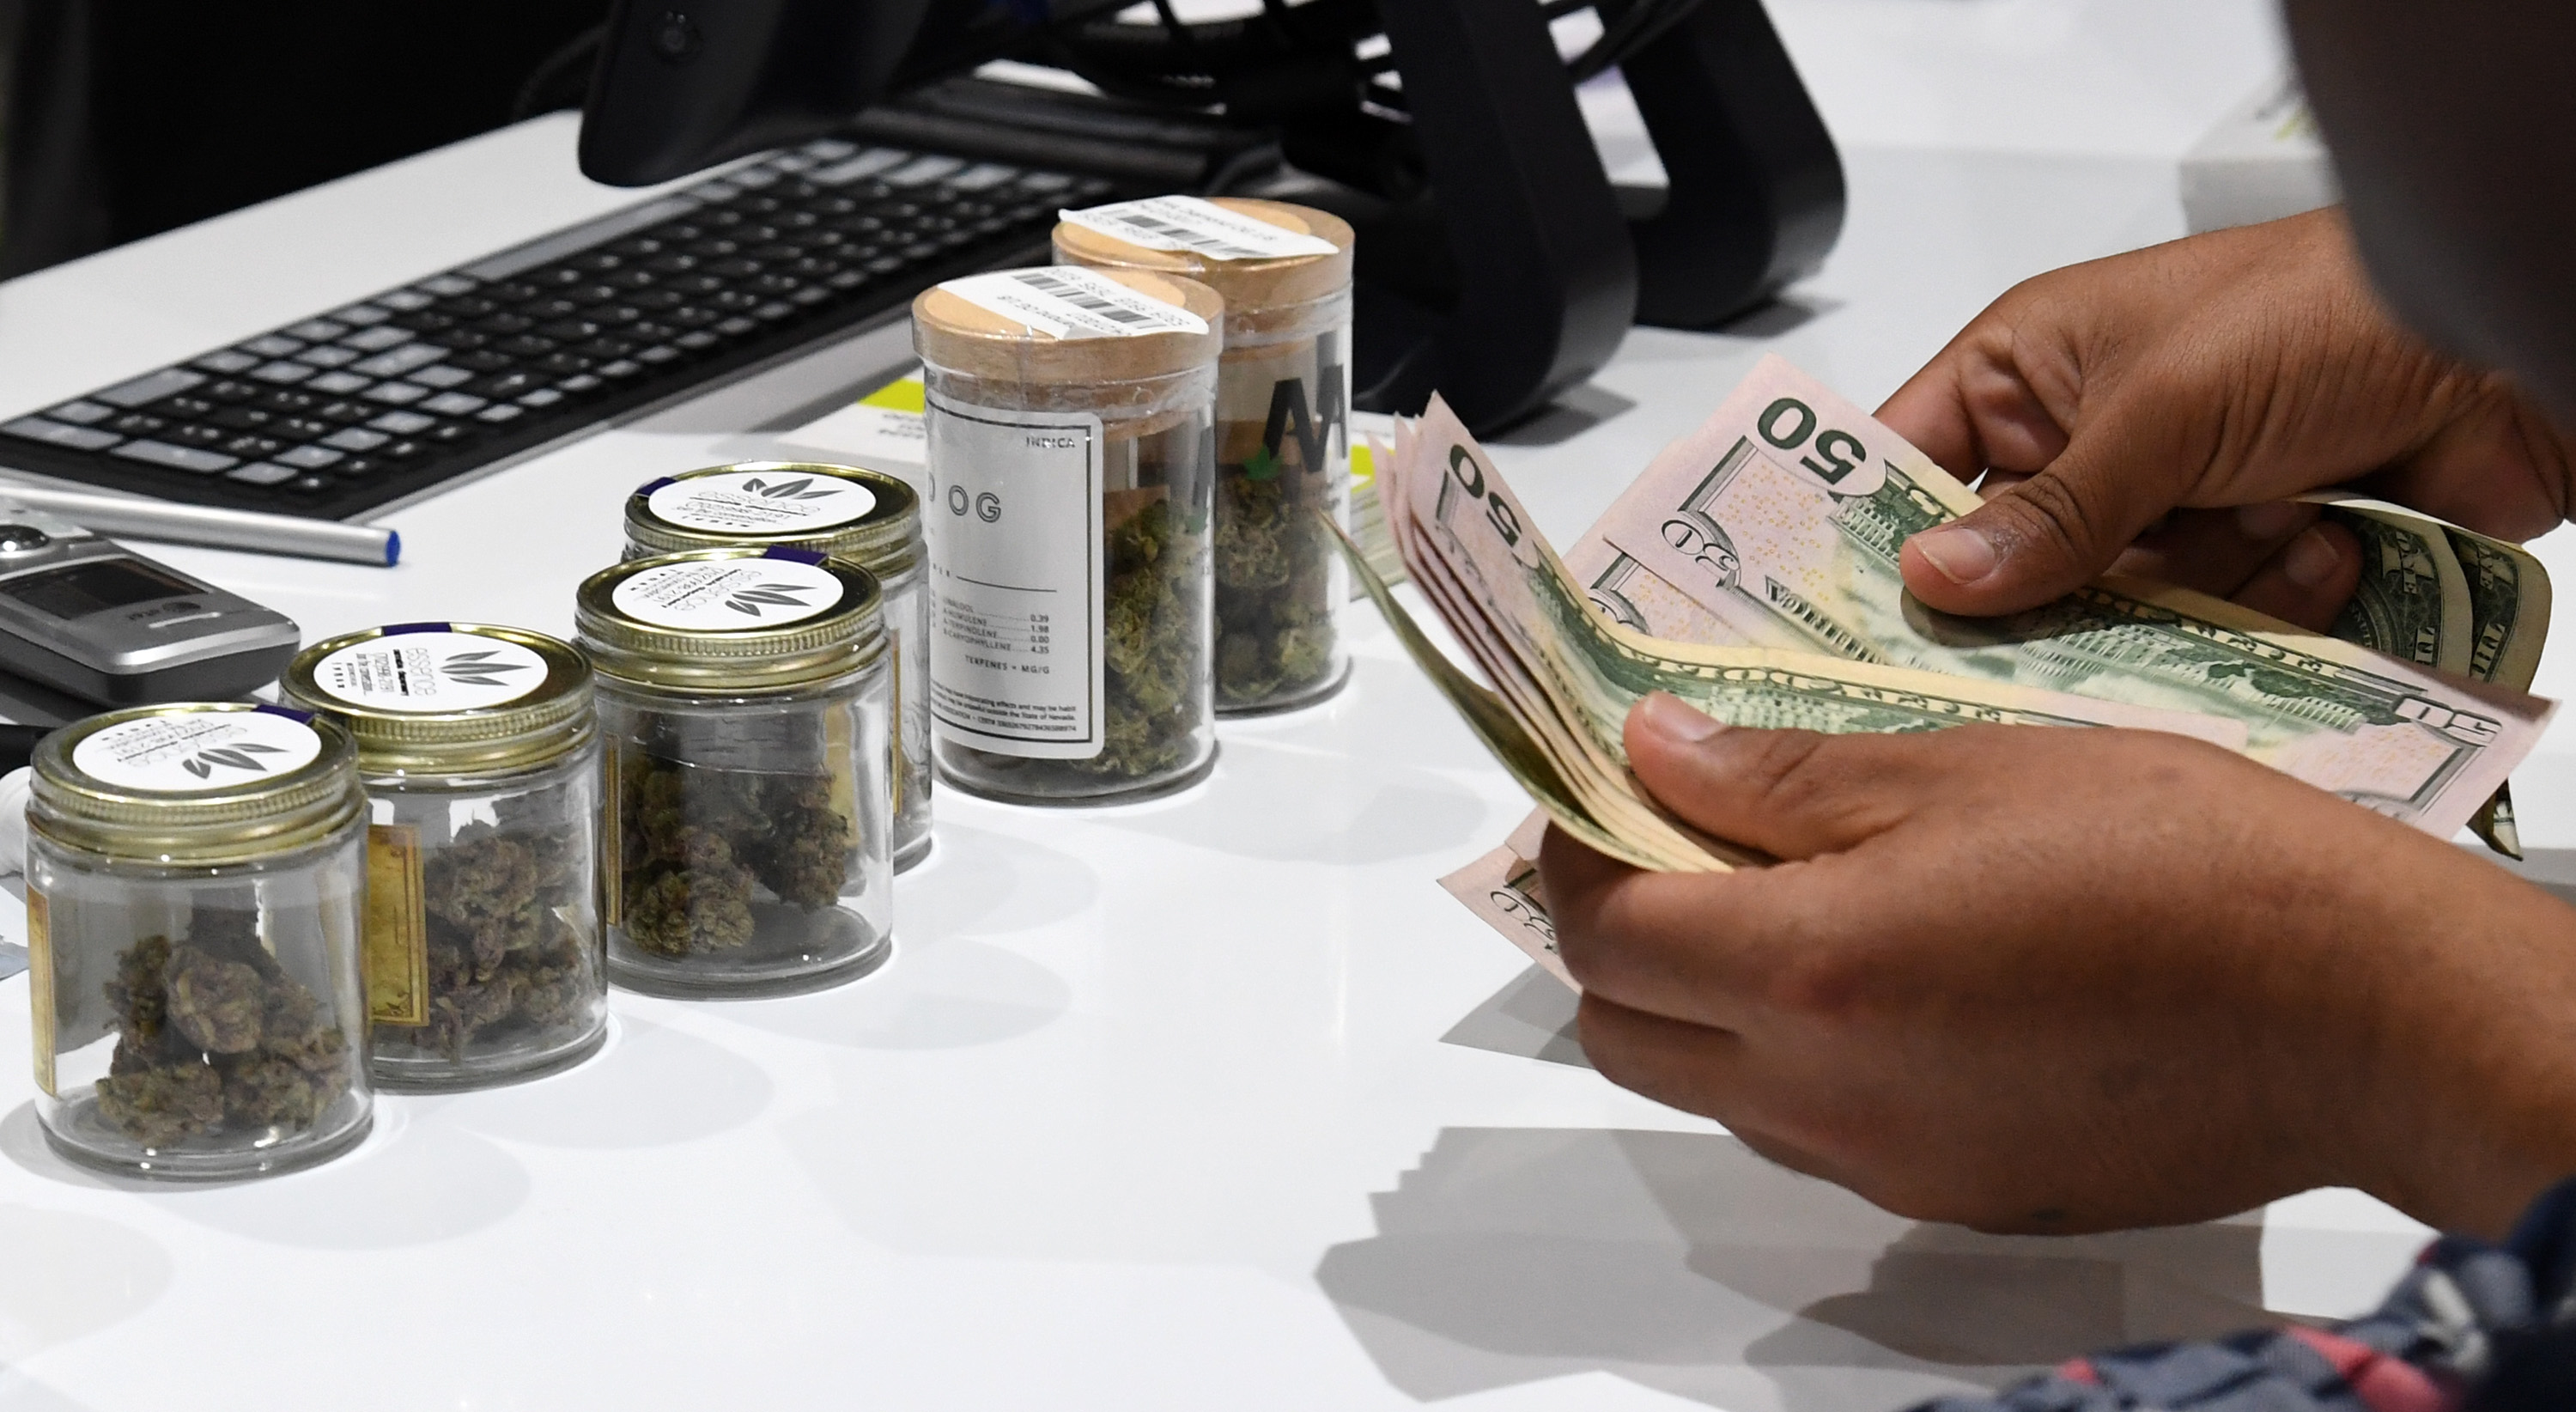 LAS VEGAS, NV - JULY 01: A customer pays for cannabis products at Essence Vegas Cannabis Dispensary after the start of recreational marijuana sales began on July 1, 2017 in Las Vegas, Nevada. Nevada joins seven other states allowing recreational marijuana use and becomes the first of four states that voted to legalize recreational sales in November's election to allow dispensaries to sell cannabis for recreational use to anyone over 21. (Photo by Ethan Miller/Getty Images)